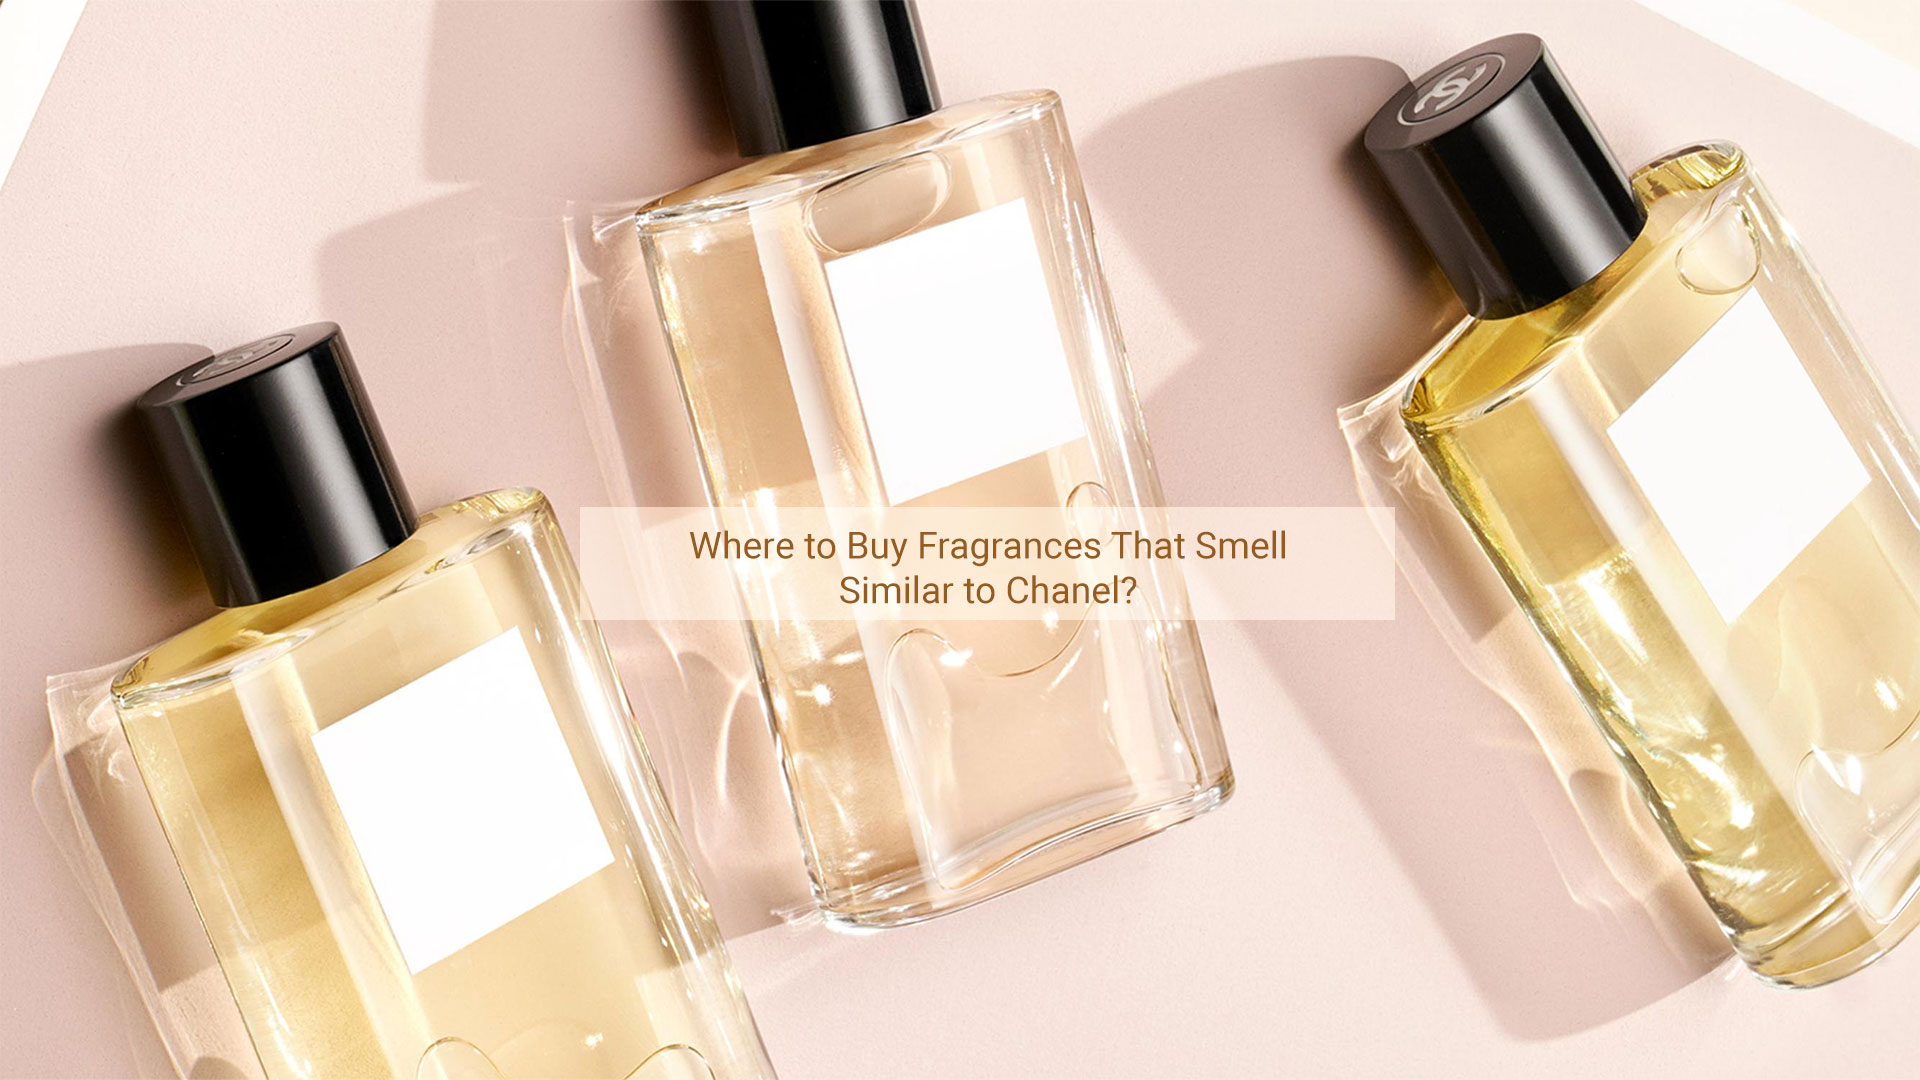 Where to Buy Fragrances That Smell Similar to Chanel